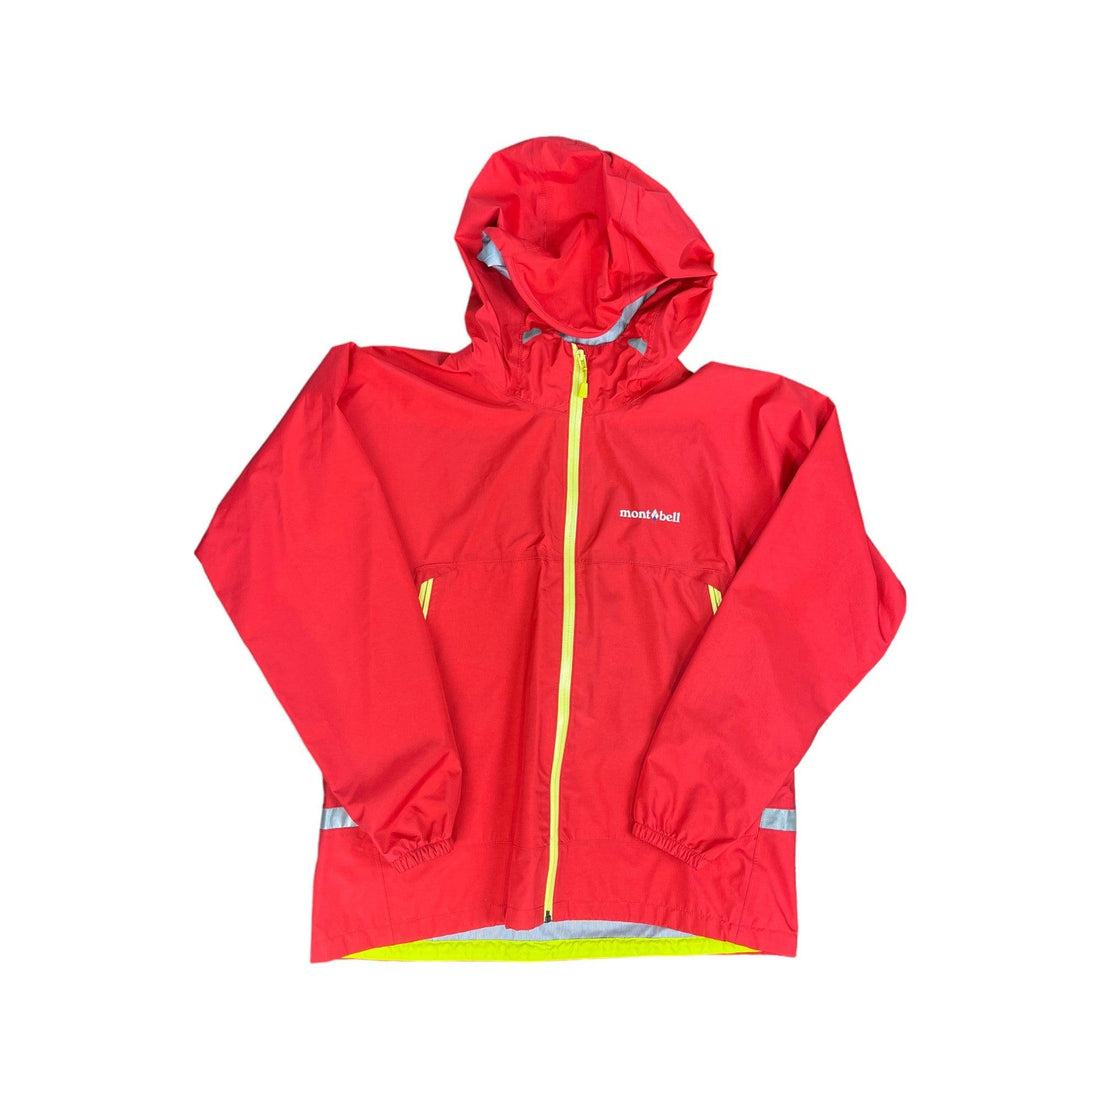 Vintage Red Montbell Jacket - Small - The Streetwear Studio